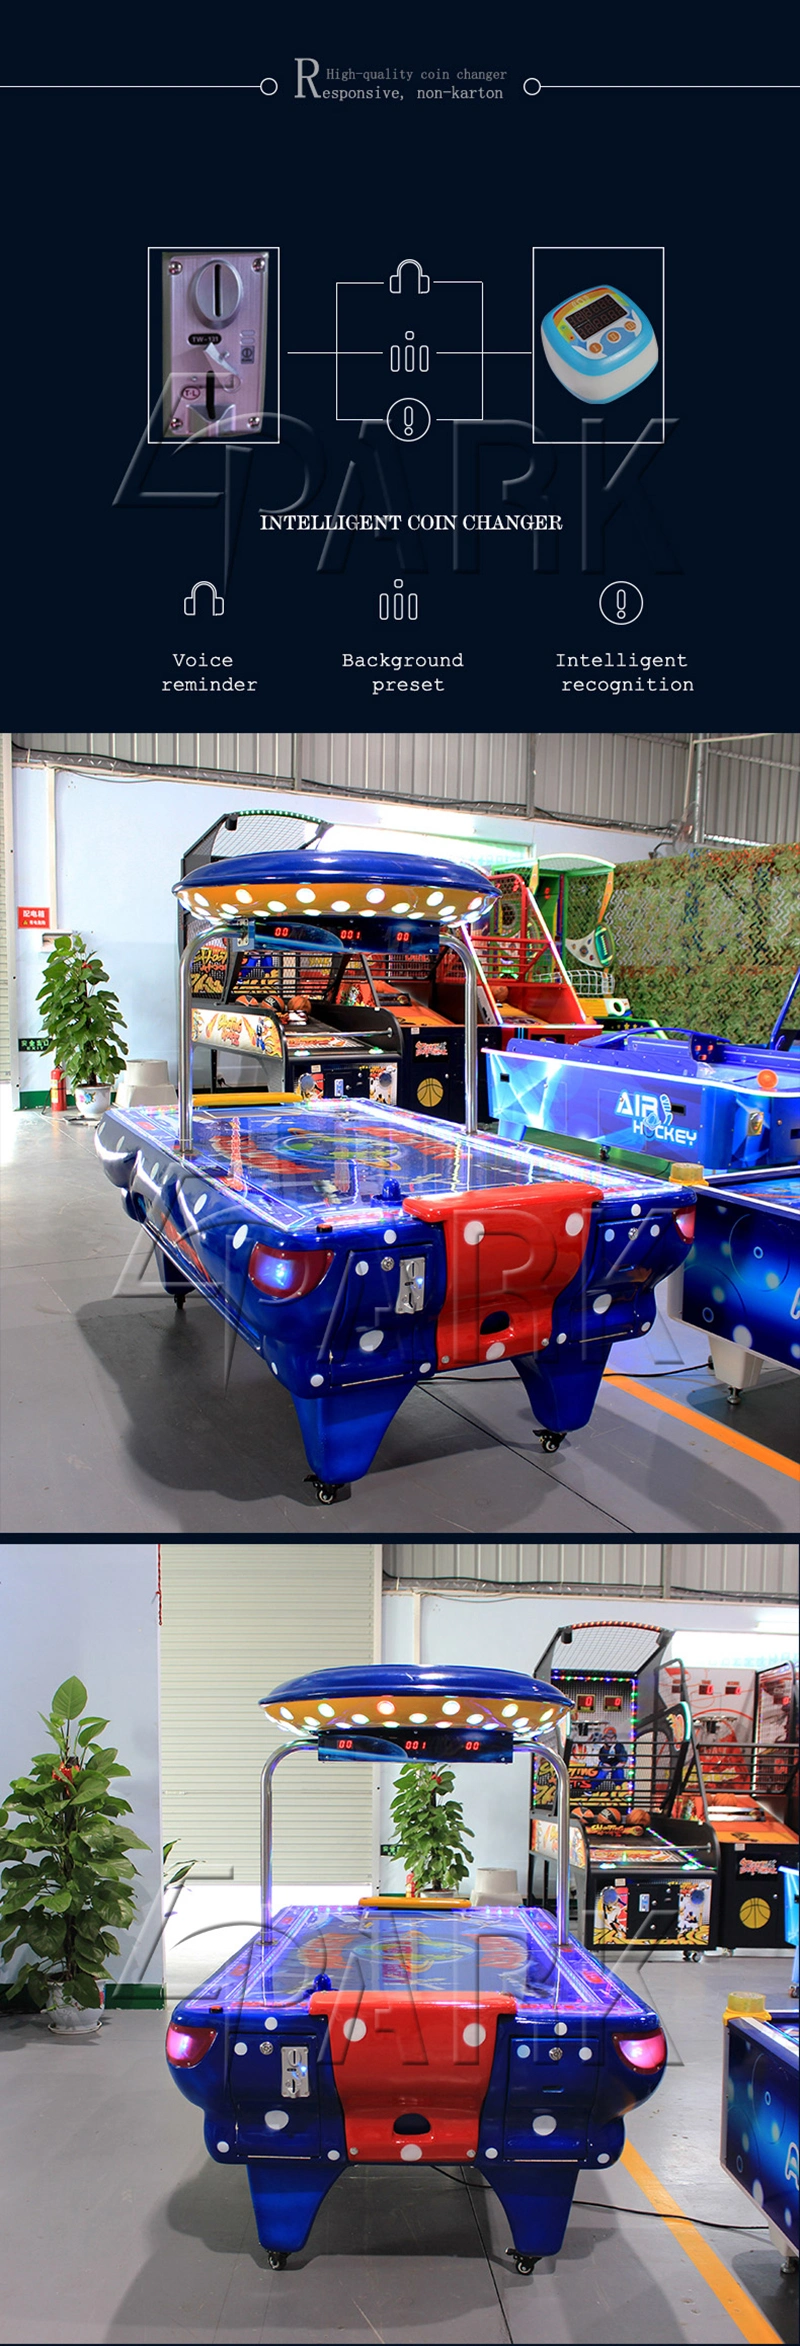 Commercial Sportcraft Four Foot Air Hockey Table Universe Hockey Table Indoor Sport Game Machine